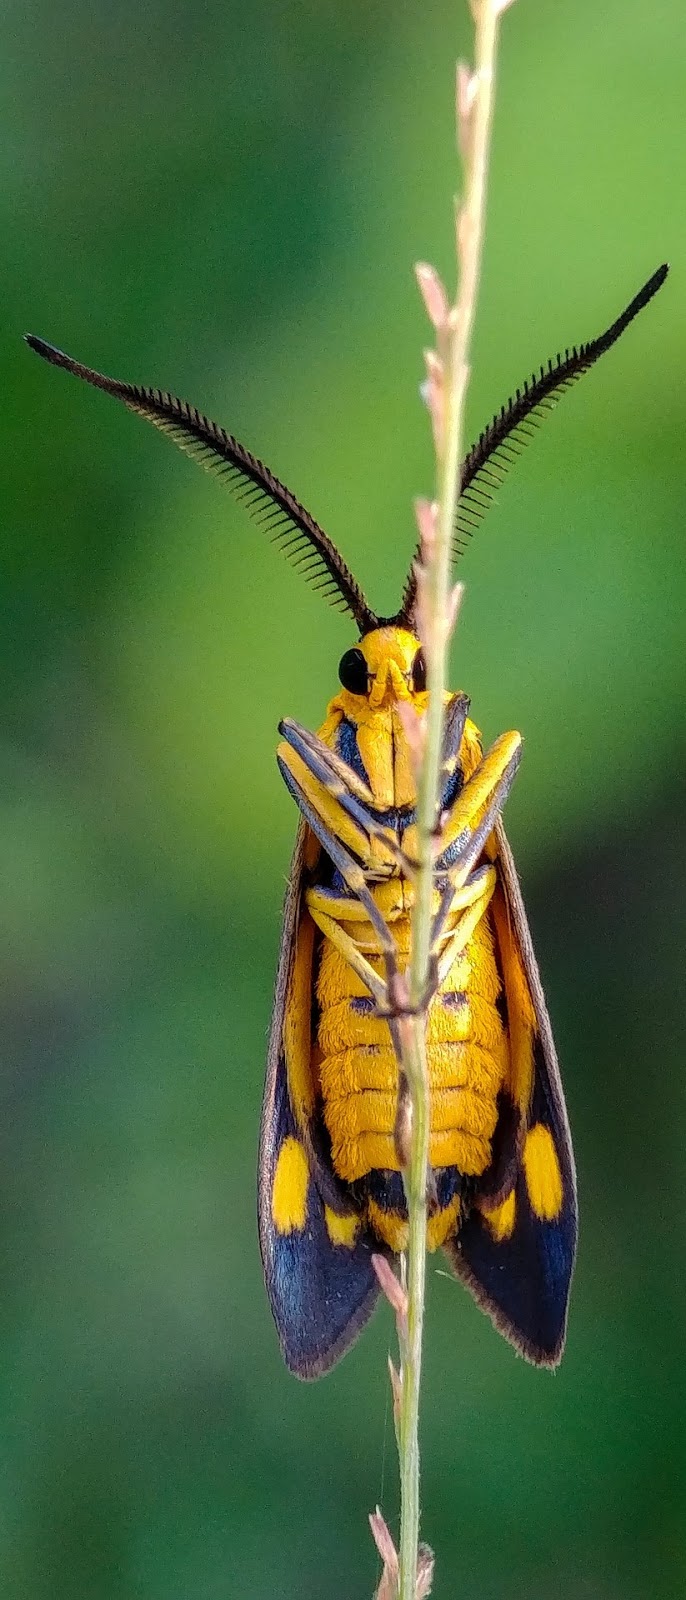 Insect with amazing antennae. 